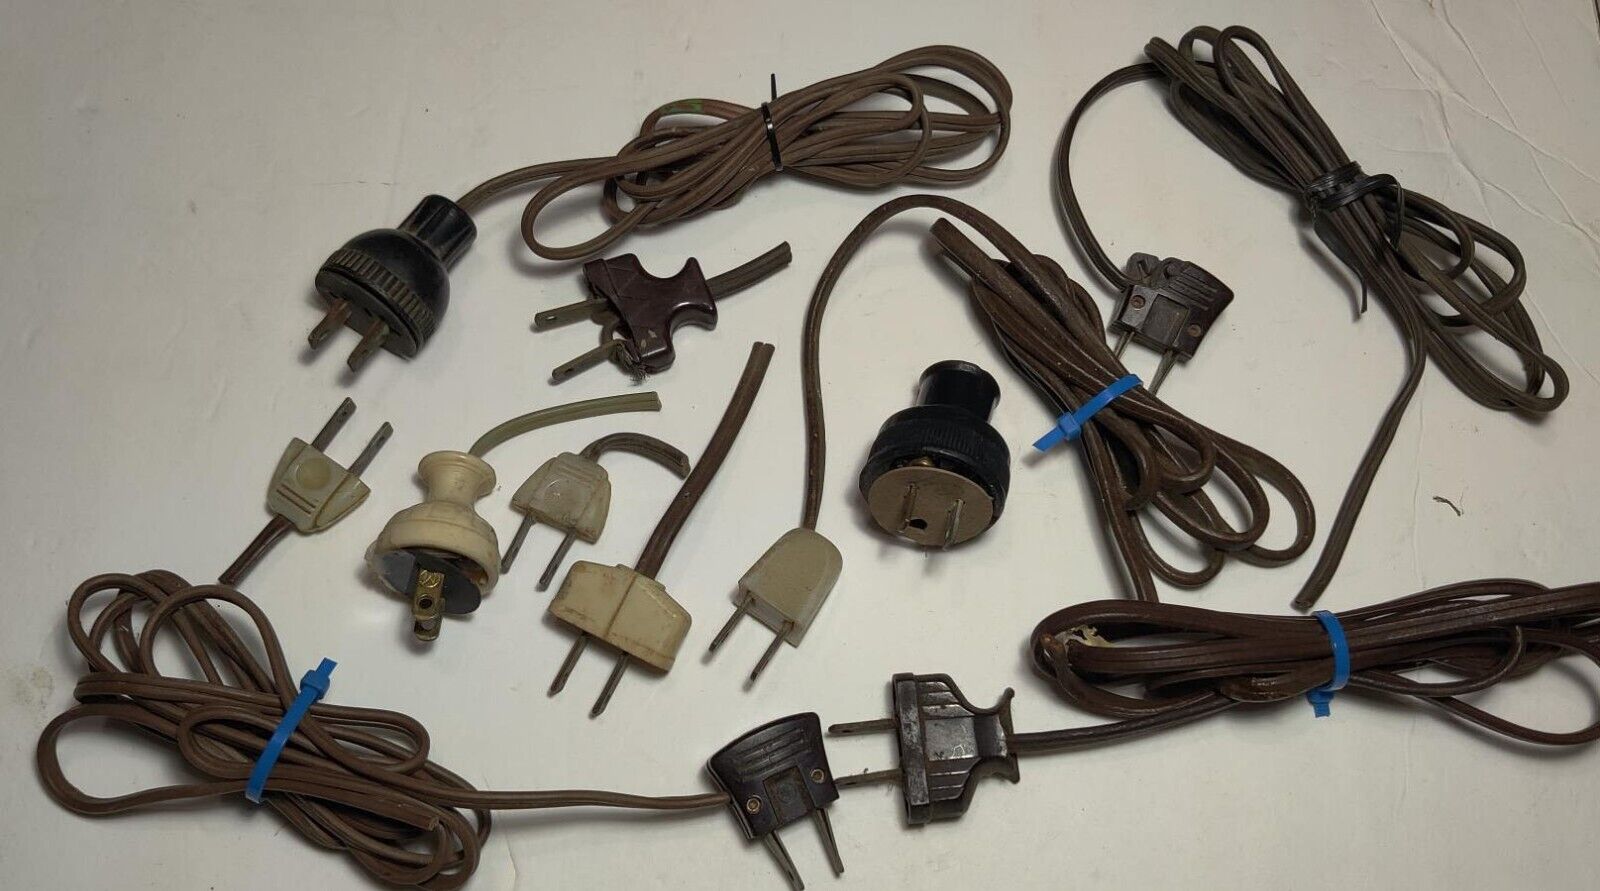 Antique Vintage Lot of 11 - Electrical Plugs for radio, lamps etc 